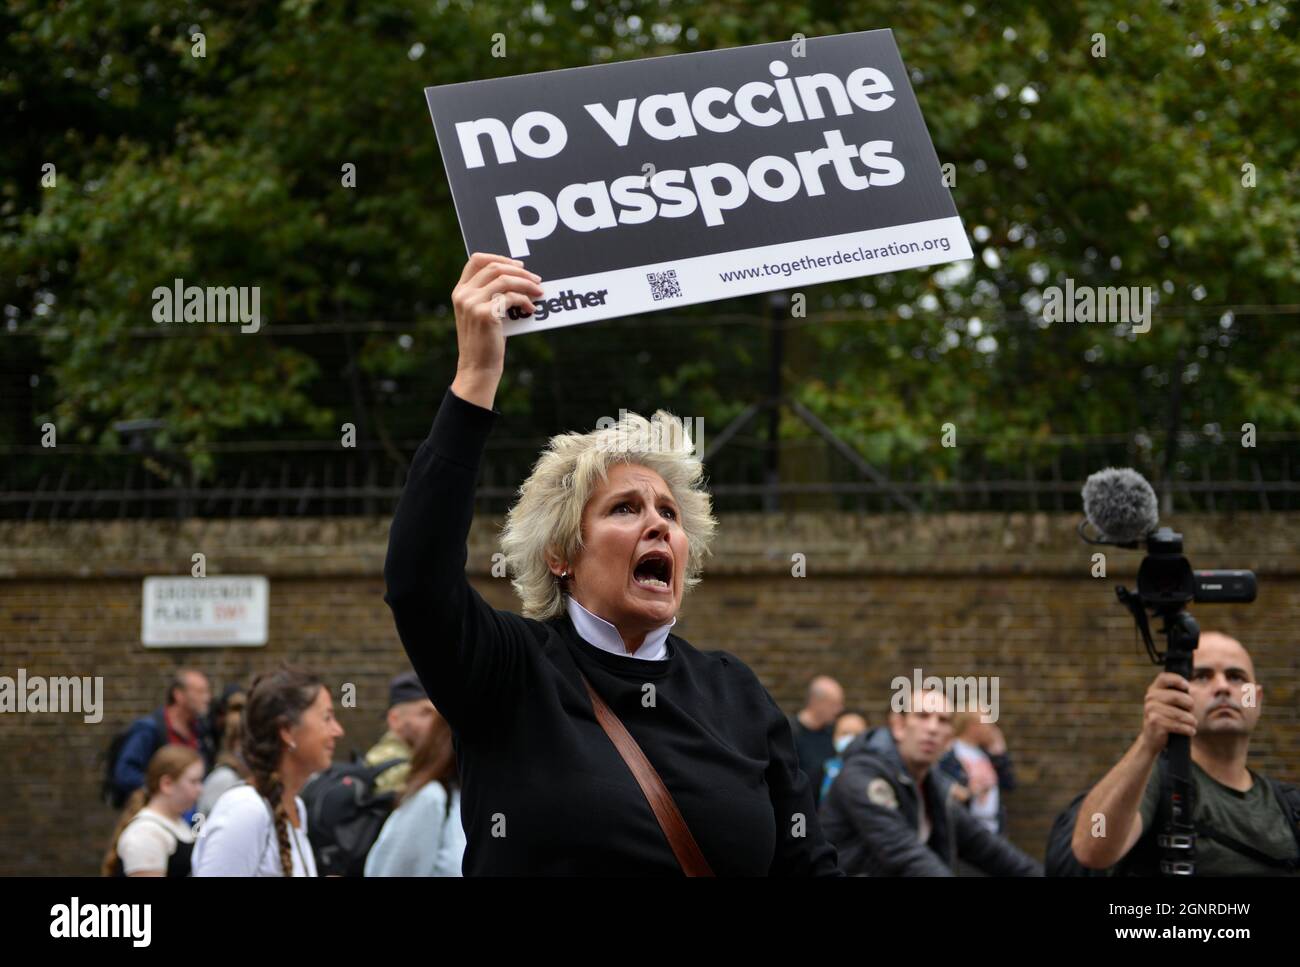 A protester with a No Vaccine Passports placard shouts to the passengers wearing face masks in a bus, during the demonstration. Stock Photo